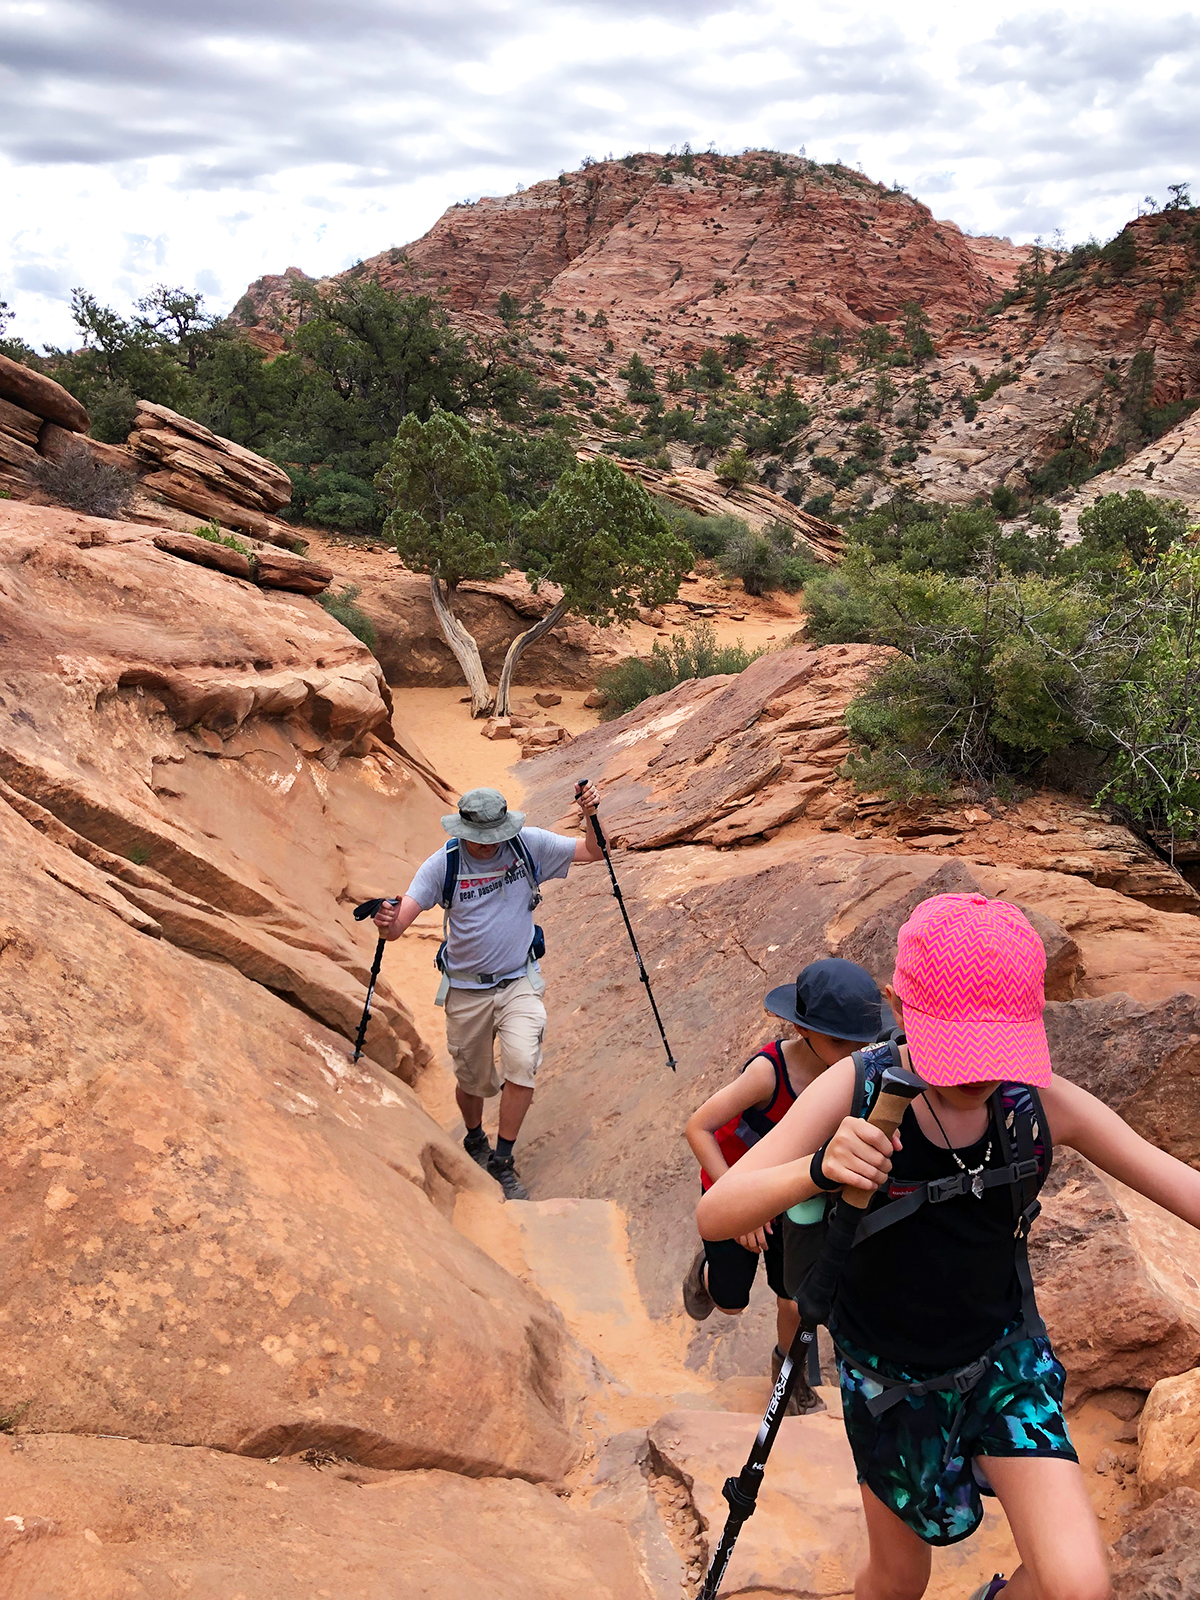 kids and man hiking up rocky terrain